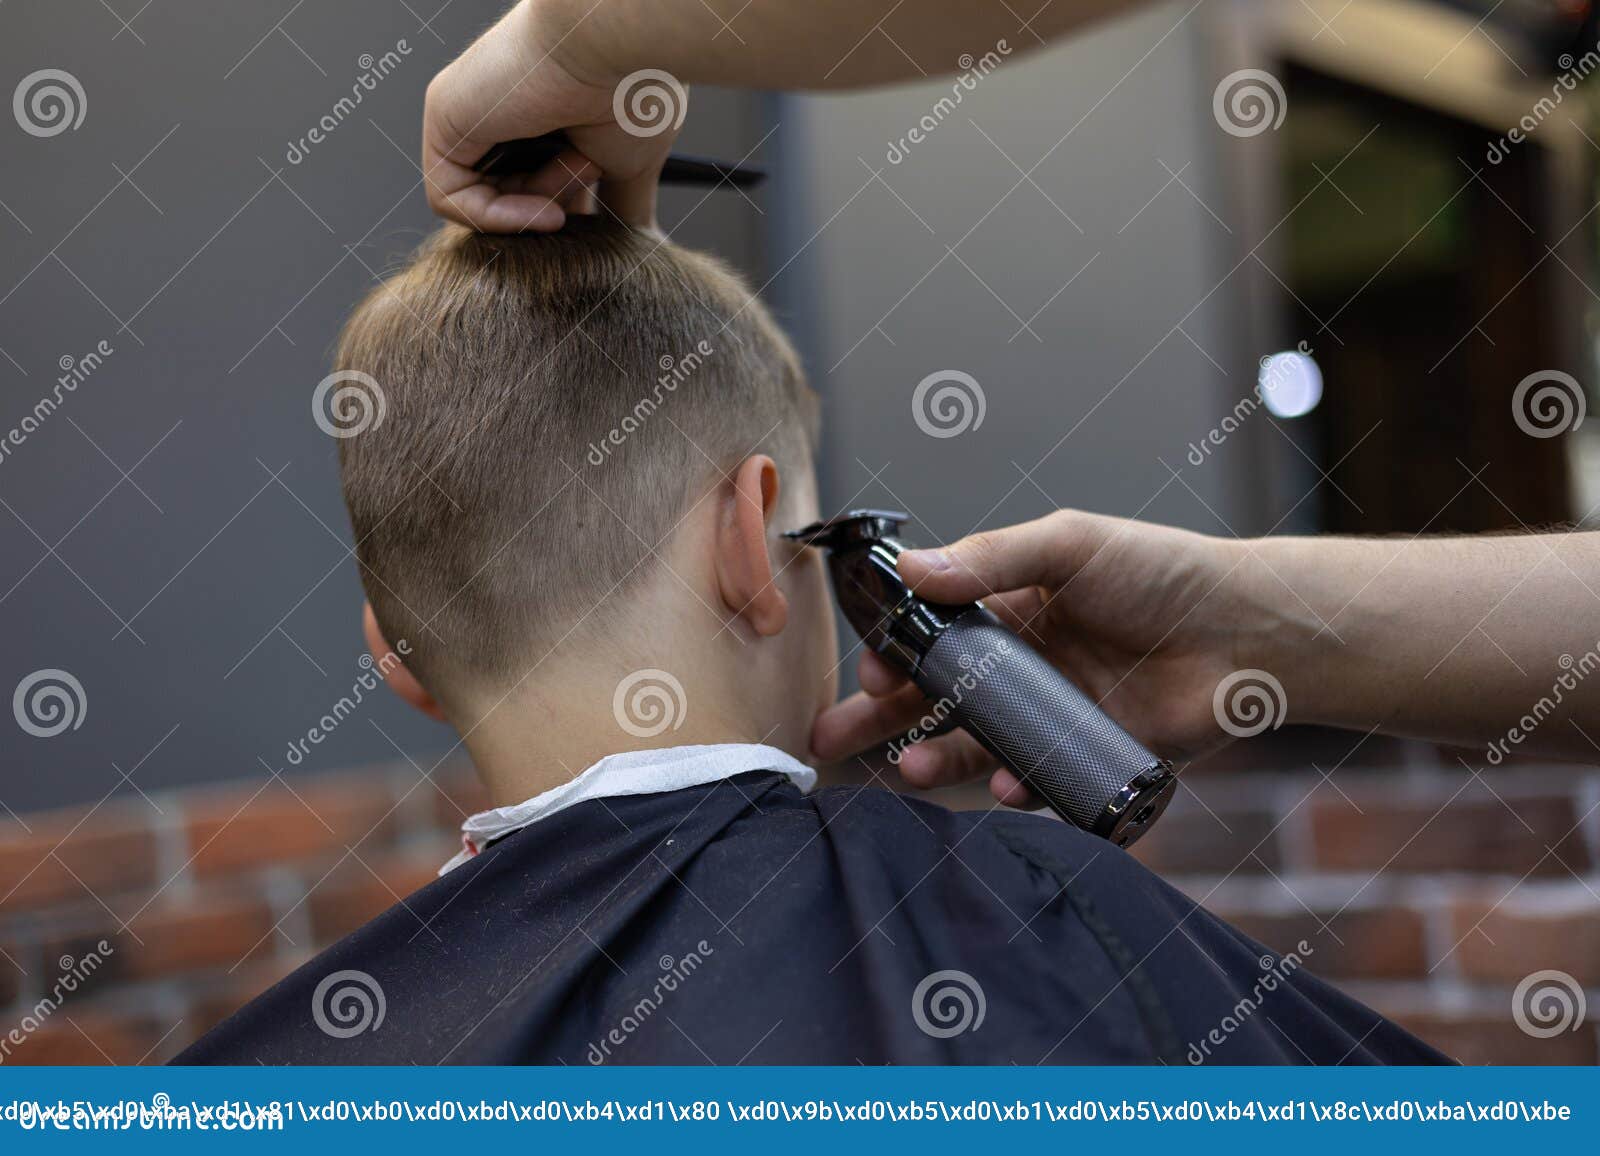 the hairdresser flattens the hair on the temples of a child boy. the boy trusts the hairdresser and sits calmly in the